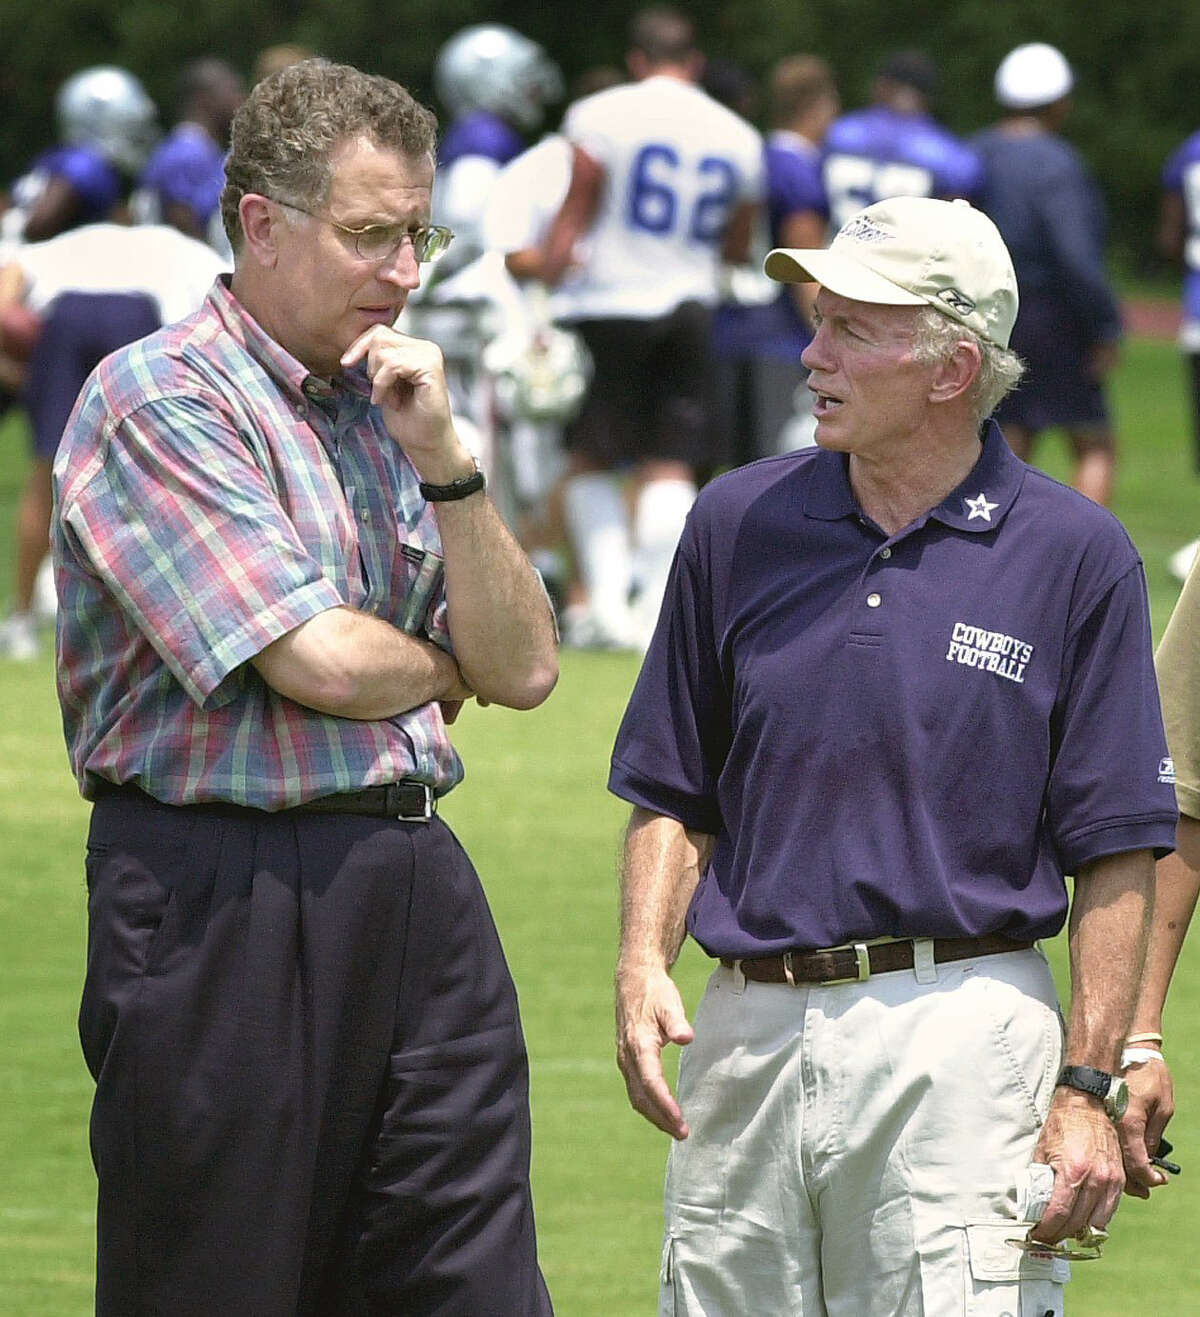 FILE - In this July 14, 2002, file photo, NFL Commissioner Paul Tagliabue, left, chats with Dallas Cowboys owner Jerry Jones during a visit by the commissioner to team's NFL football minicamp in Irving, Texas. Tagliabue and Jones are both finalists for the Pro Football Hall of FameÂs Class of 2017, the Hall announced Tuesday, Jan. 3, 2017. (AP Photo/Tony Gutierrez, File)